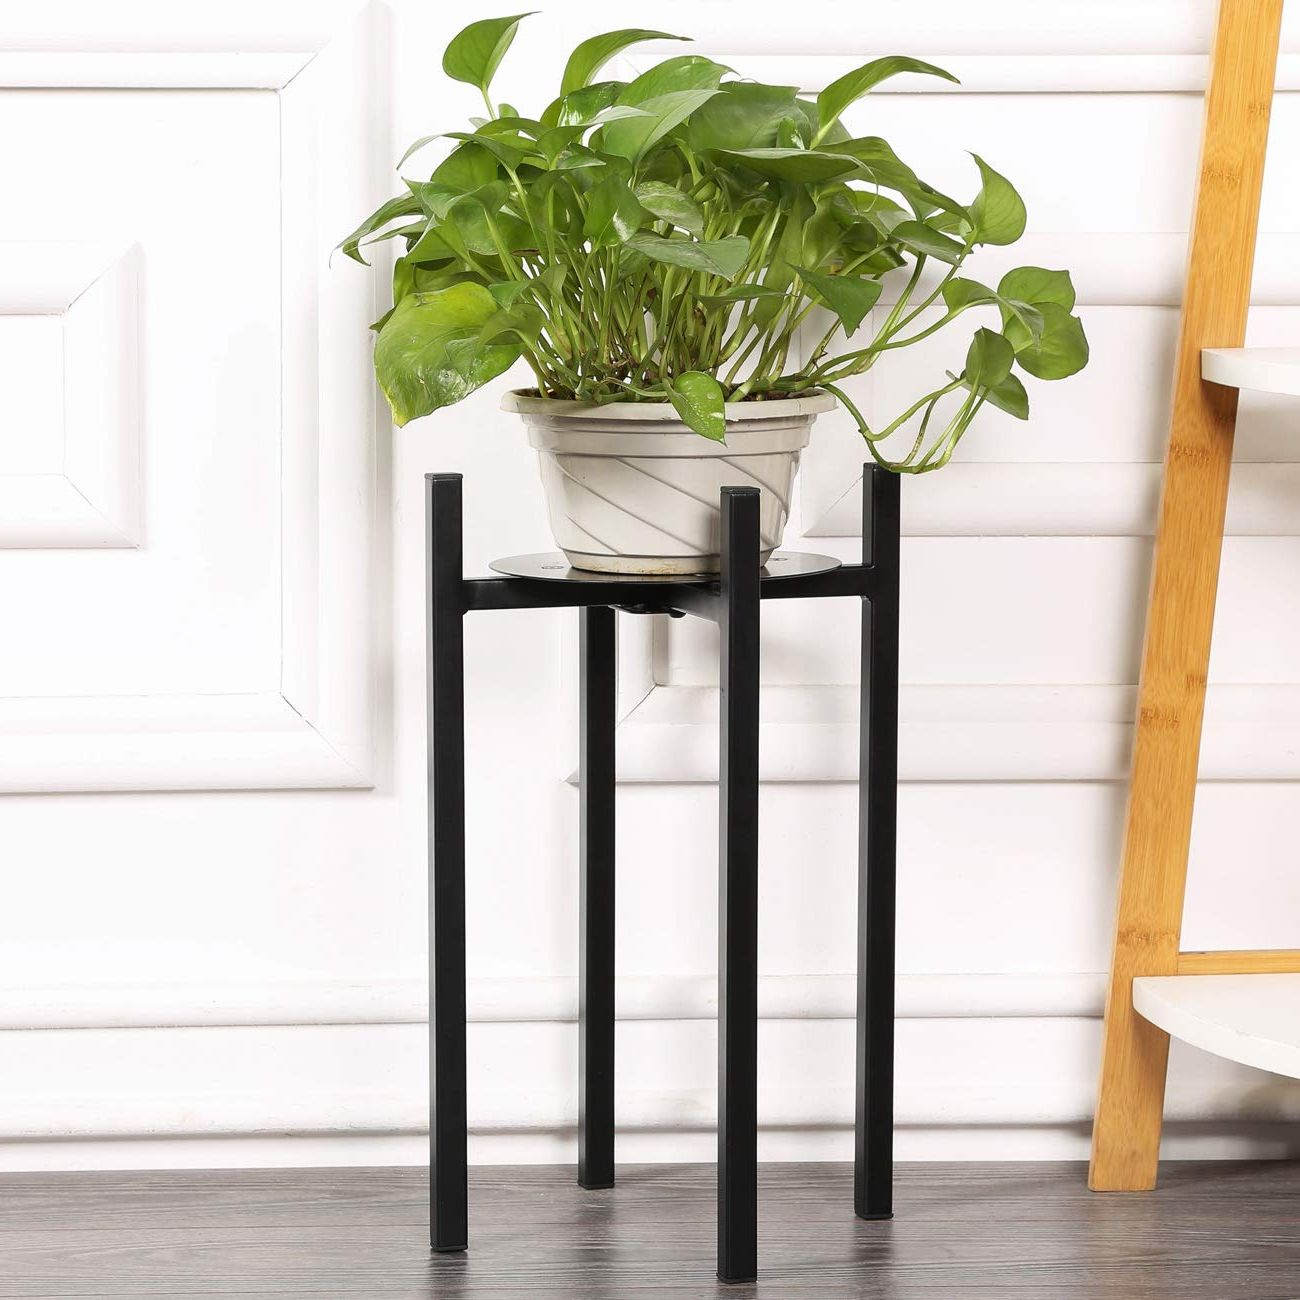 Fashionable Galvanized Plant Stands Within Amazon : Sunnyglade Plant Stand Metal Potted Plant Holder Sturdy,  Galvanized Steel Pot Stand With Stylish Mid Century Design, Medium For  Indoor, Outdoor House, Garden & Patio (15" High) : Patio, Lawn & (View 10 of 15)